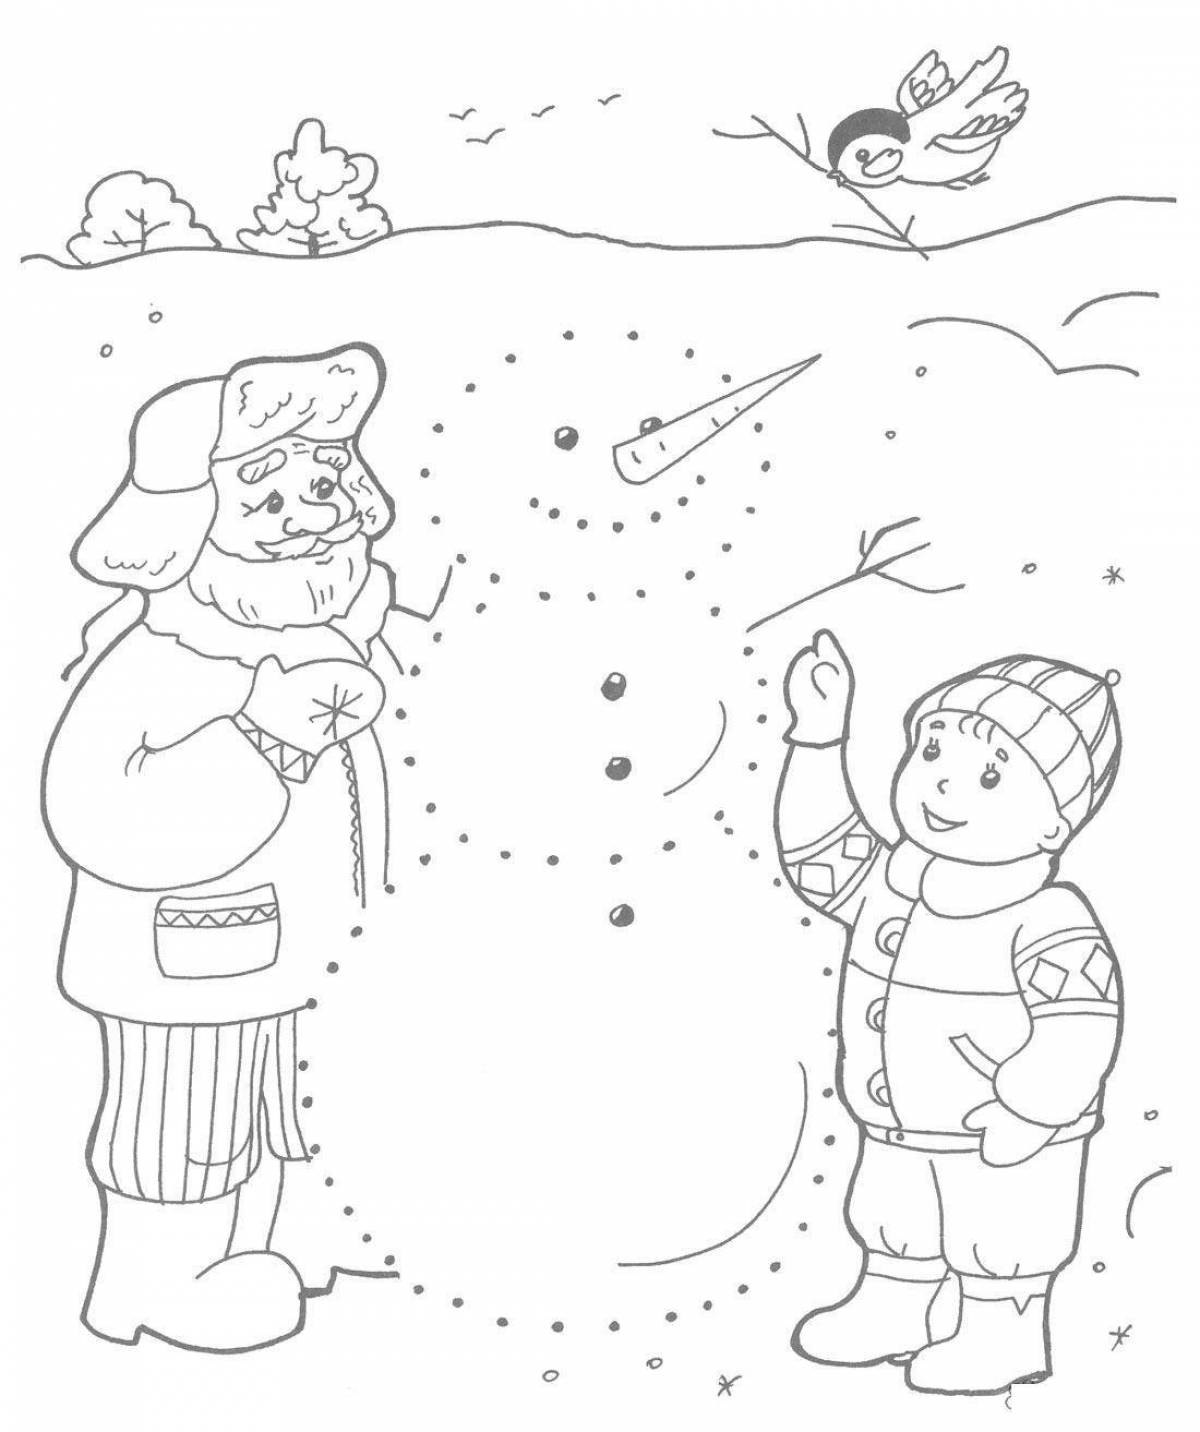 Fun coloring book winter for children 5-6 years old